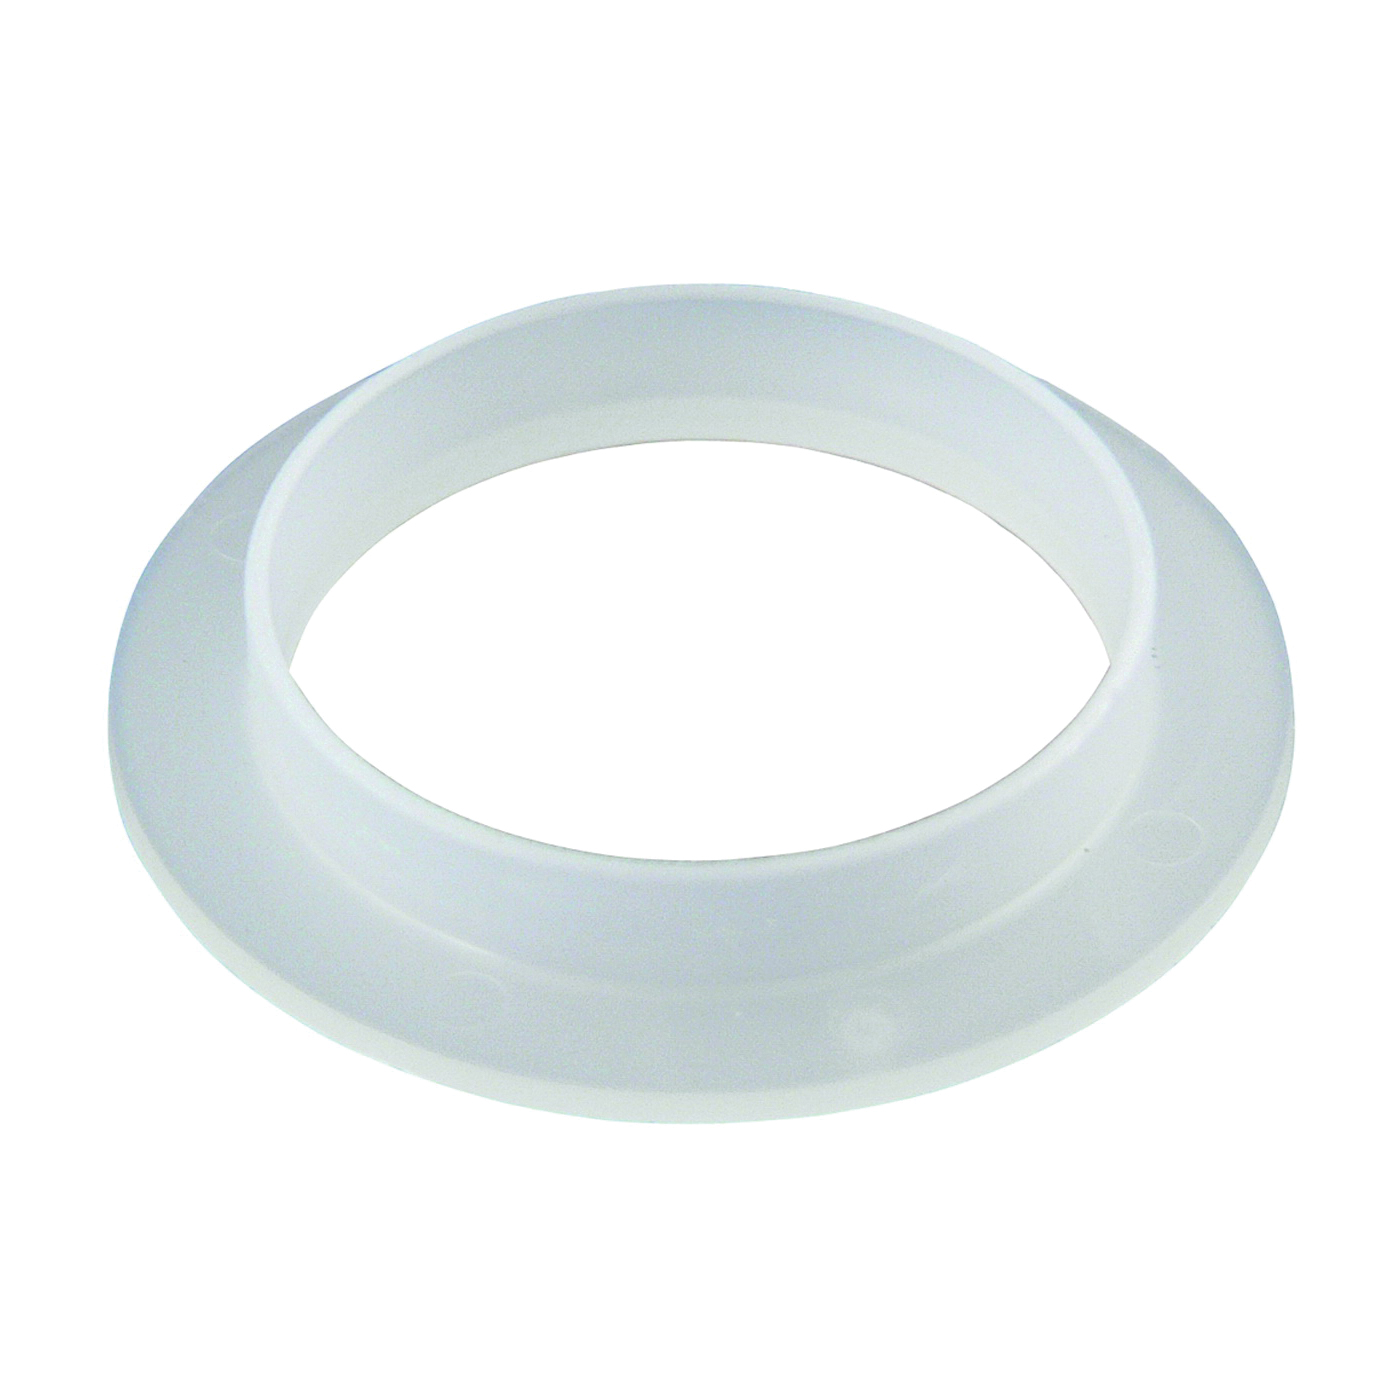 50879PBU/PP855-15 Tailpiece Washer, 1-1/2 in, Polyethylene, For: Plastic Drainage Systems